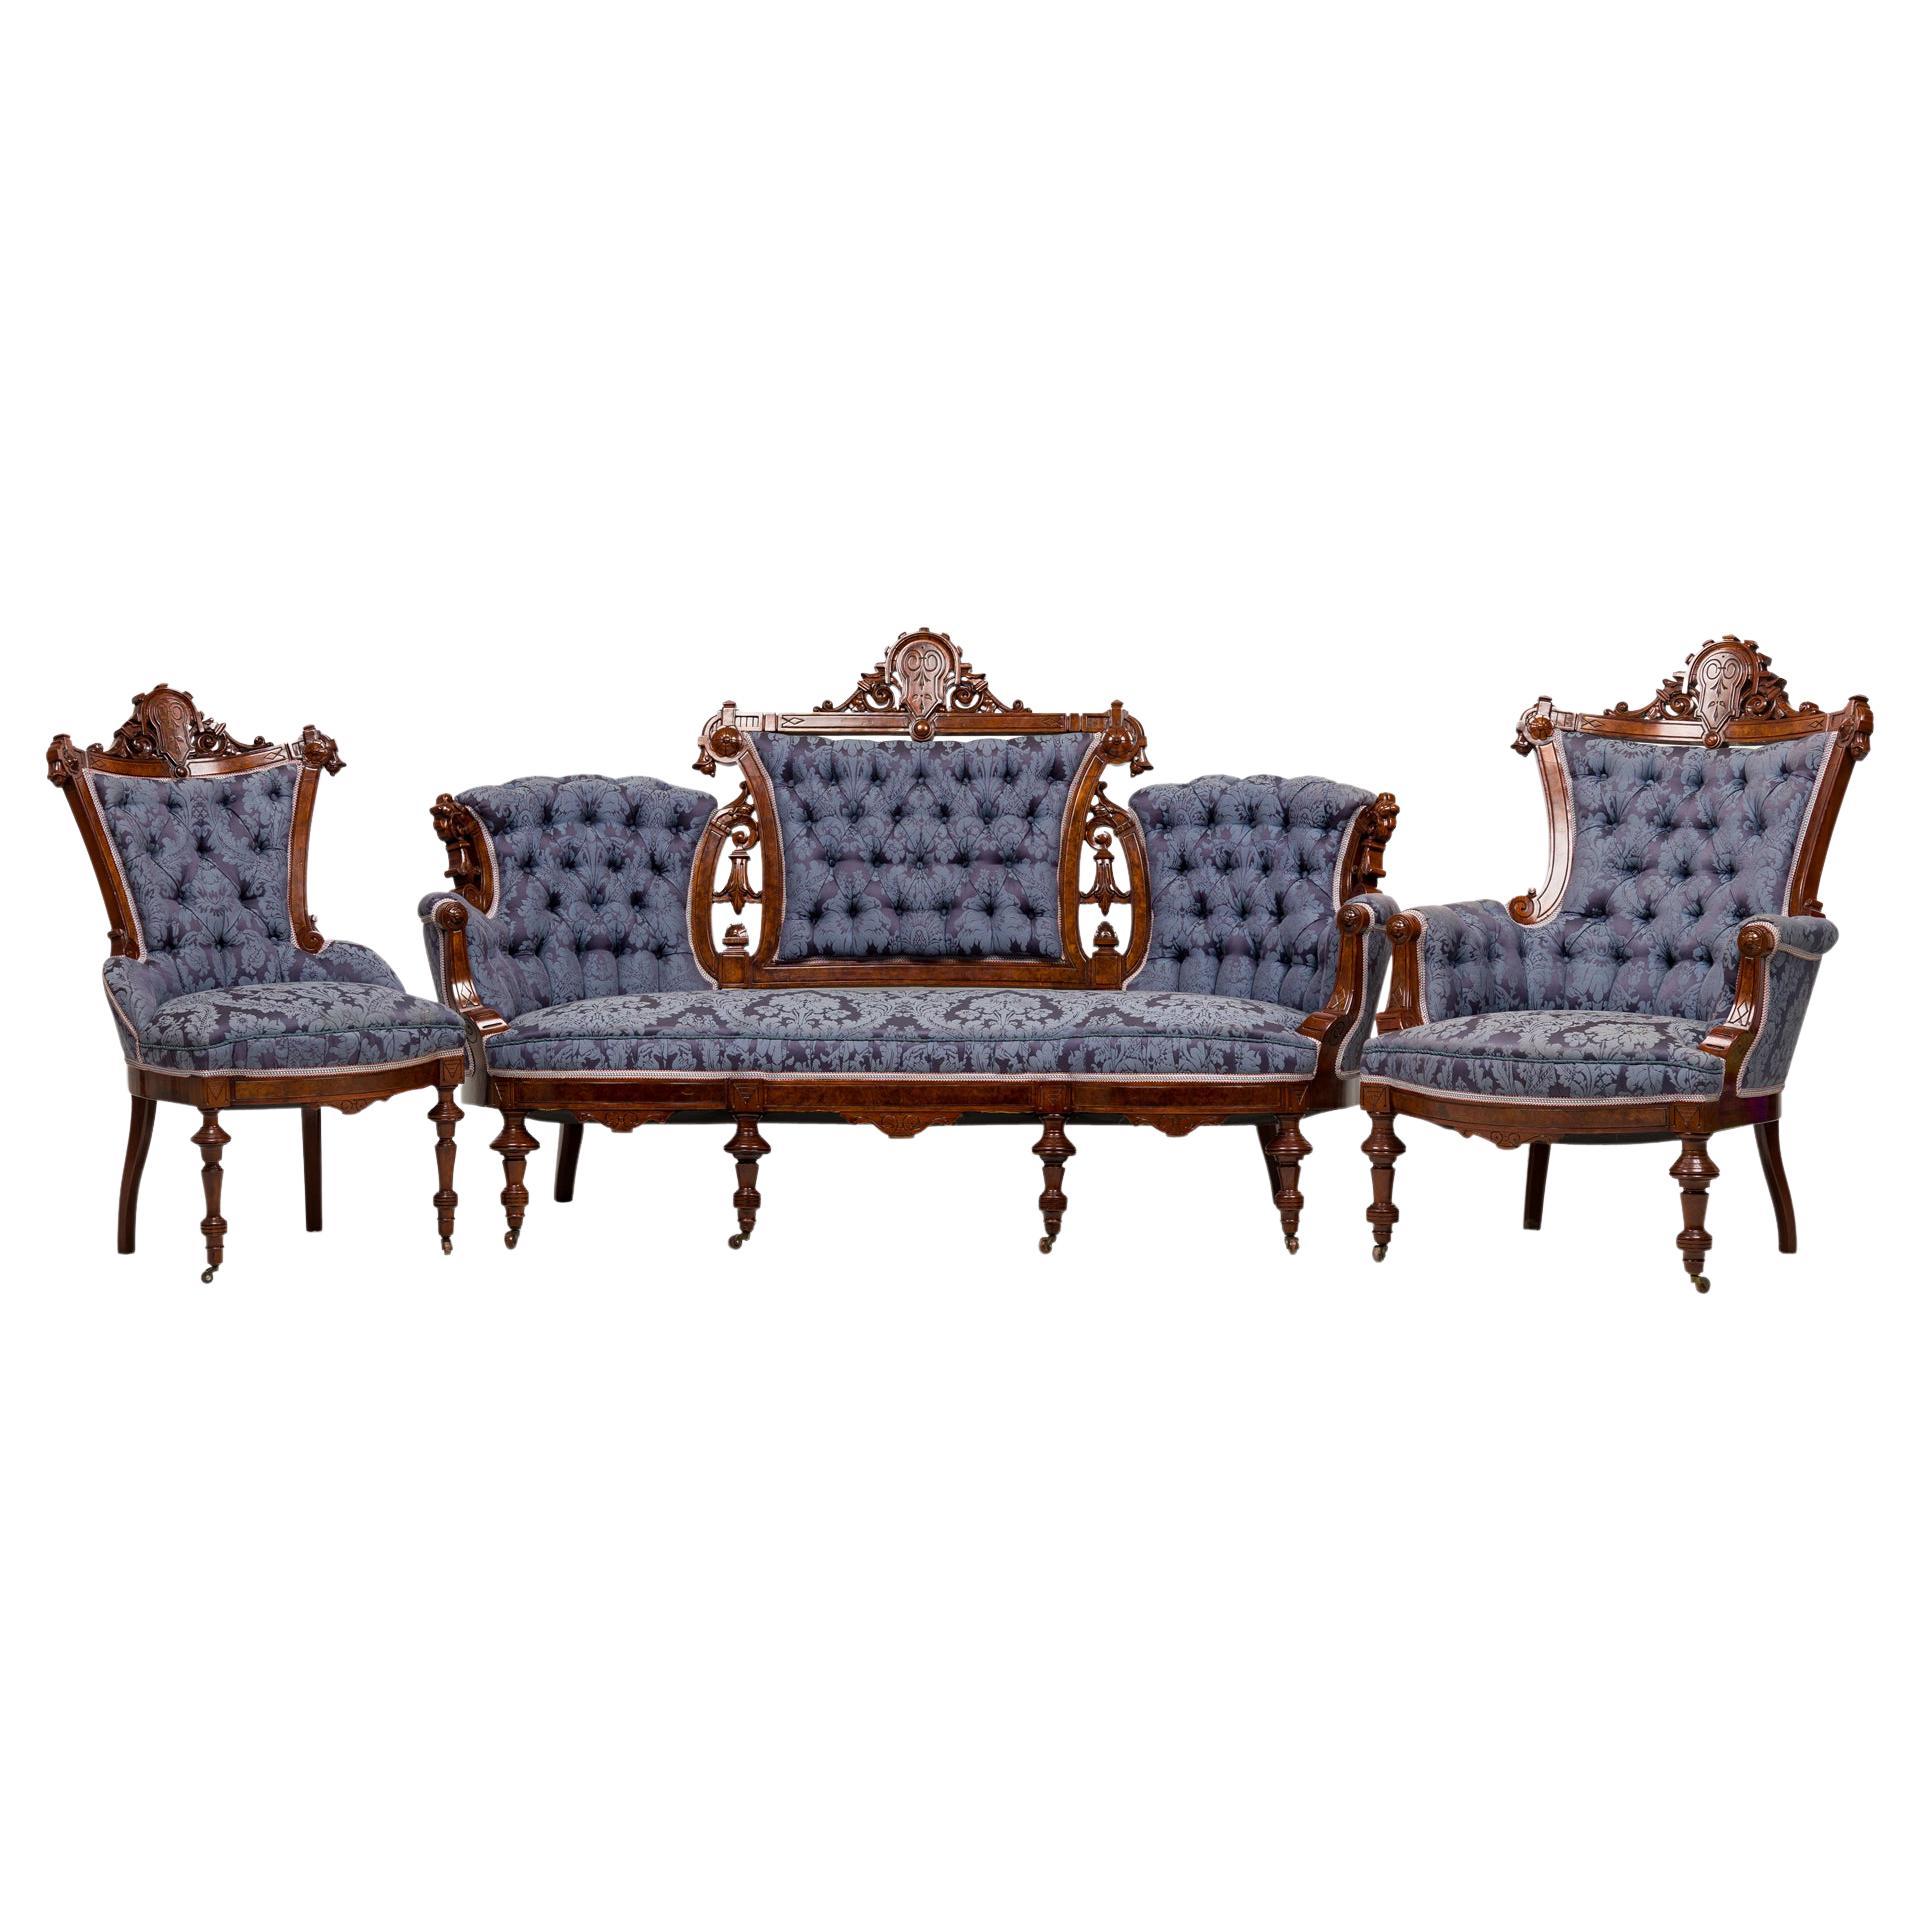 6 Piece American Victorian Blue Tufted Damask Mahogany Living Room Set For Sale